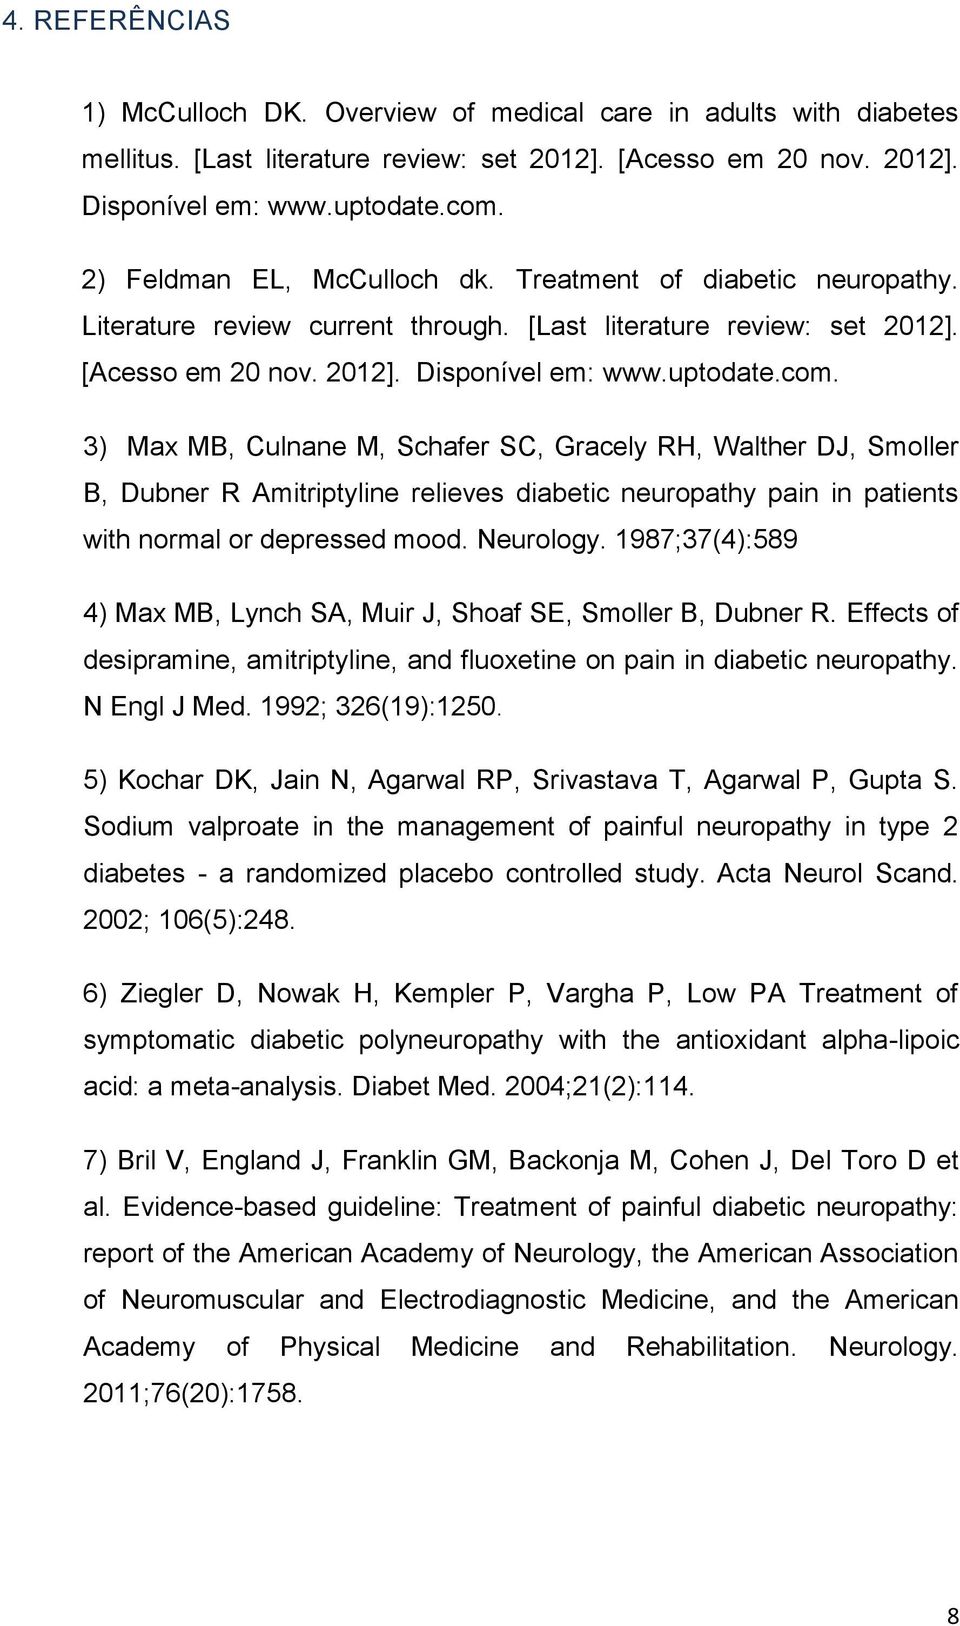 3) Max MB, Culnane M, Schafer SC, Gracely RH, Walther DJ, Smoller B, Dubner R Amitriptyline relieves diabetic neuropathy pain in patients with normal or depressed mood. Neurology.